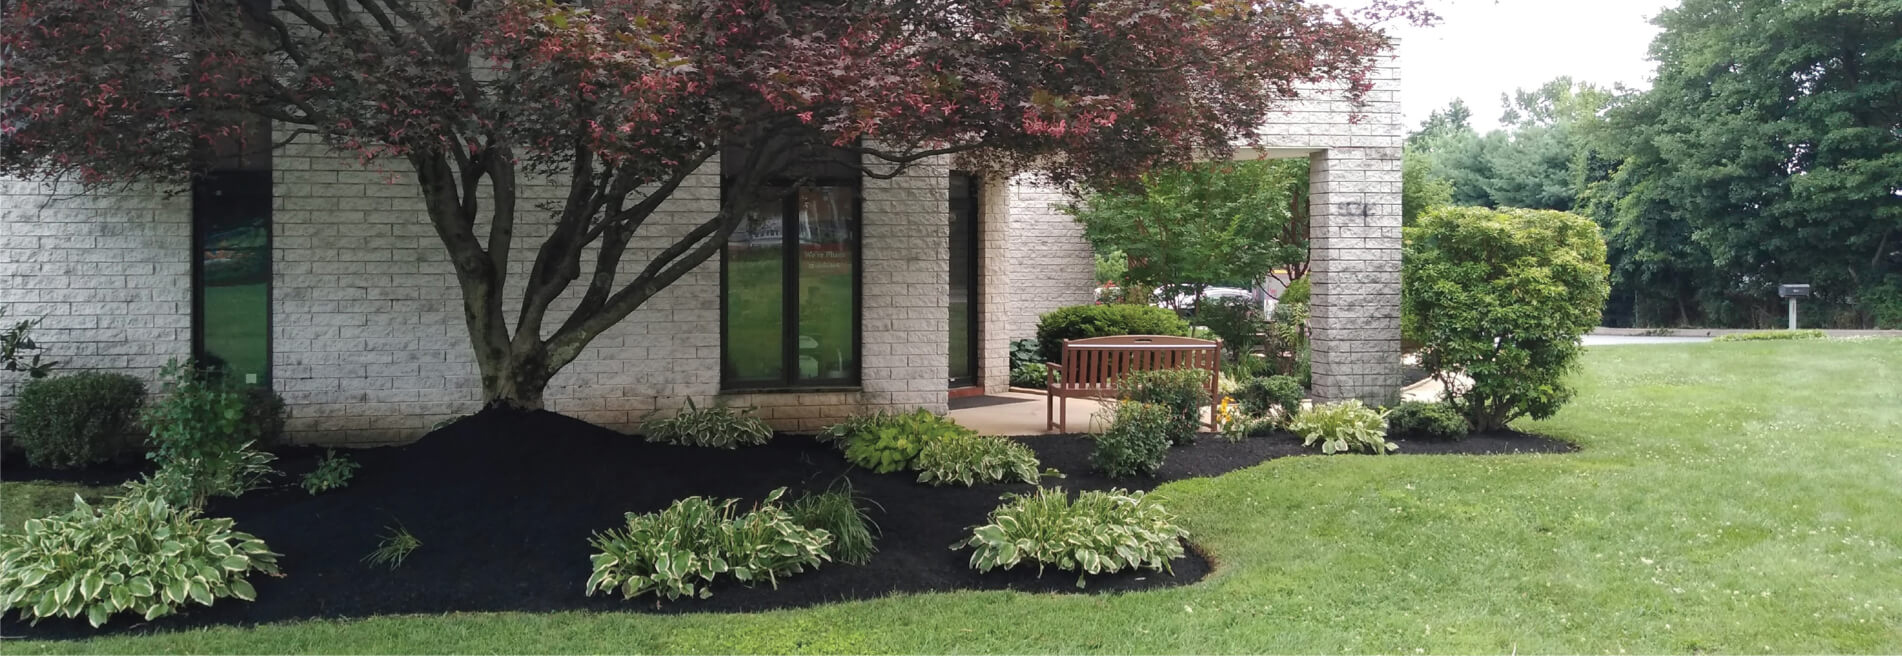 COMMERCIAL LANDSCAPING & LAWN MAINTENANCE